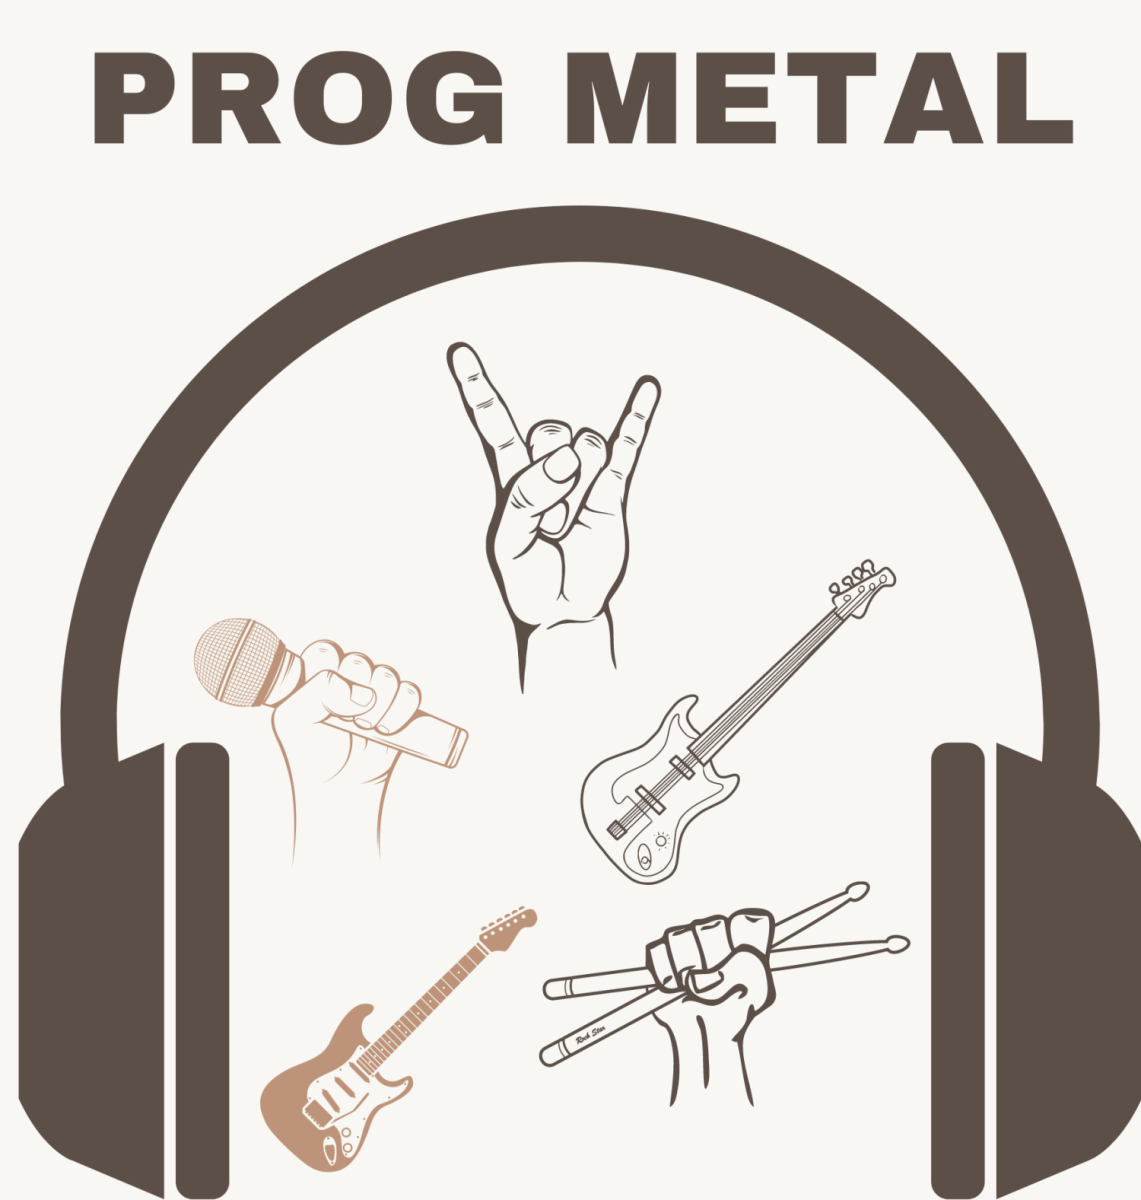 Metal+as+a+genre+can+be+seen+in+many+different+forms.+One+of+those+forms+in+prog+metal.+A+different+type+of+sound+for+the+metal+genre+that+could+attract+more+listeners+to+the+genre+as+a+whole.+